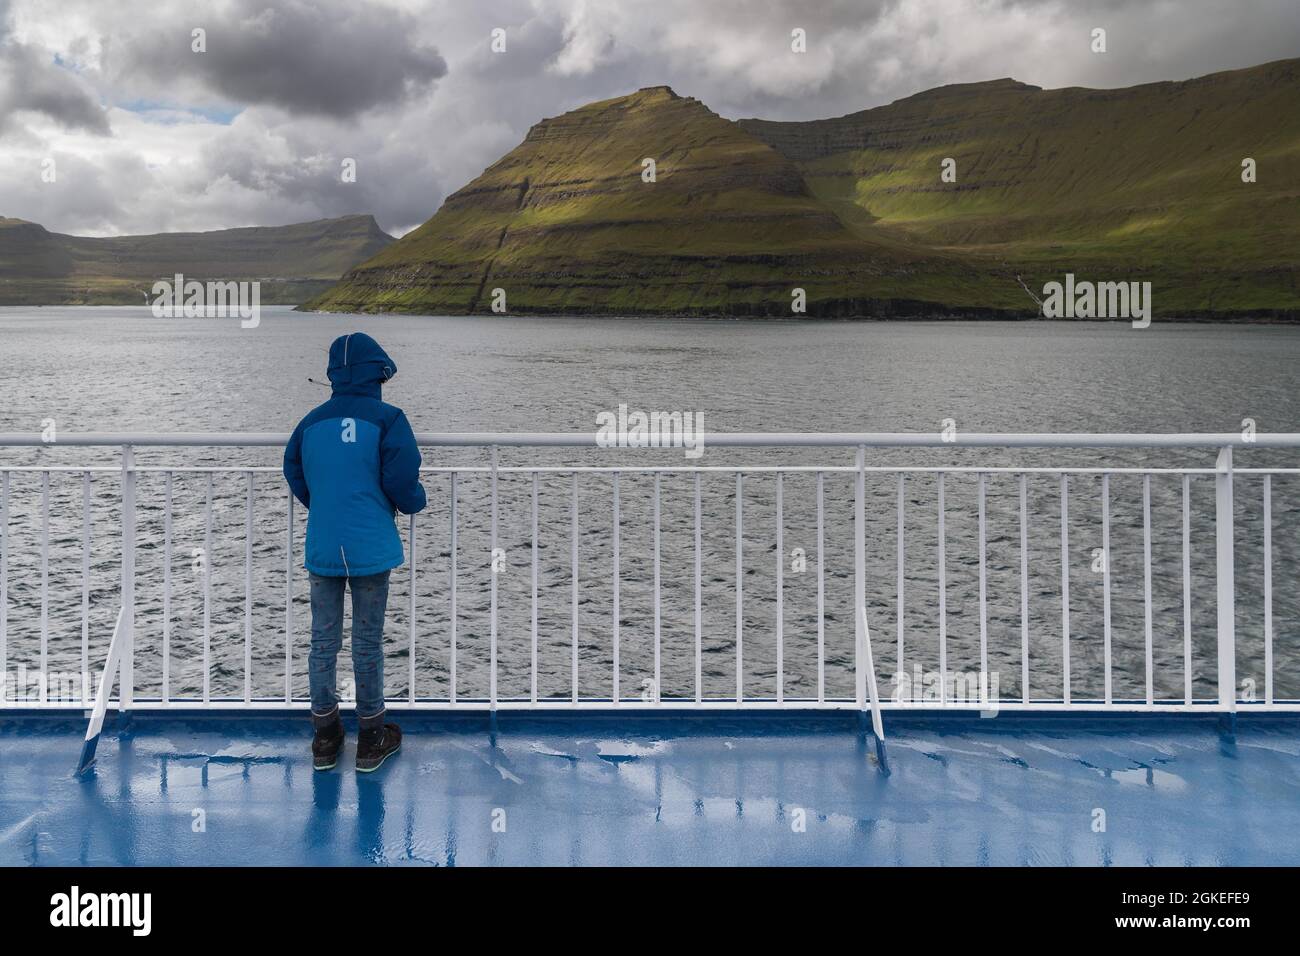 Girl standing at the railing of the ferry Norroena, Smyril Line ship, during passage through the Faroe Islands, Faroe Islands, Denmark Stock Photo